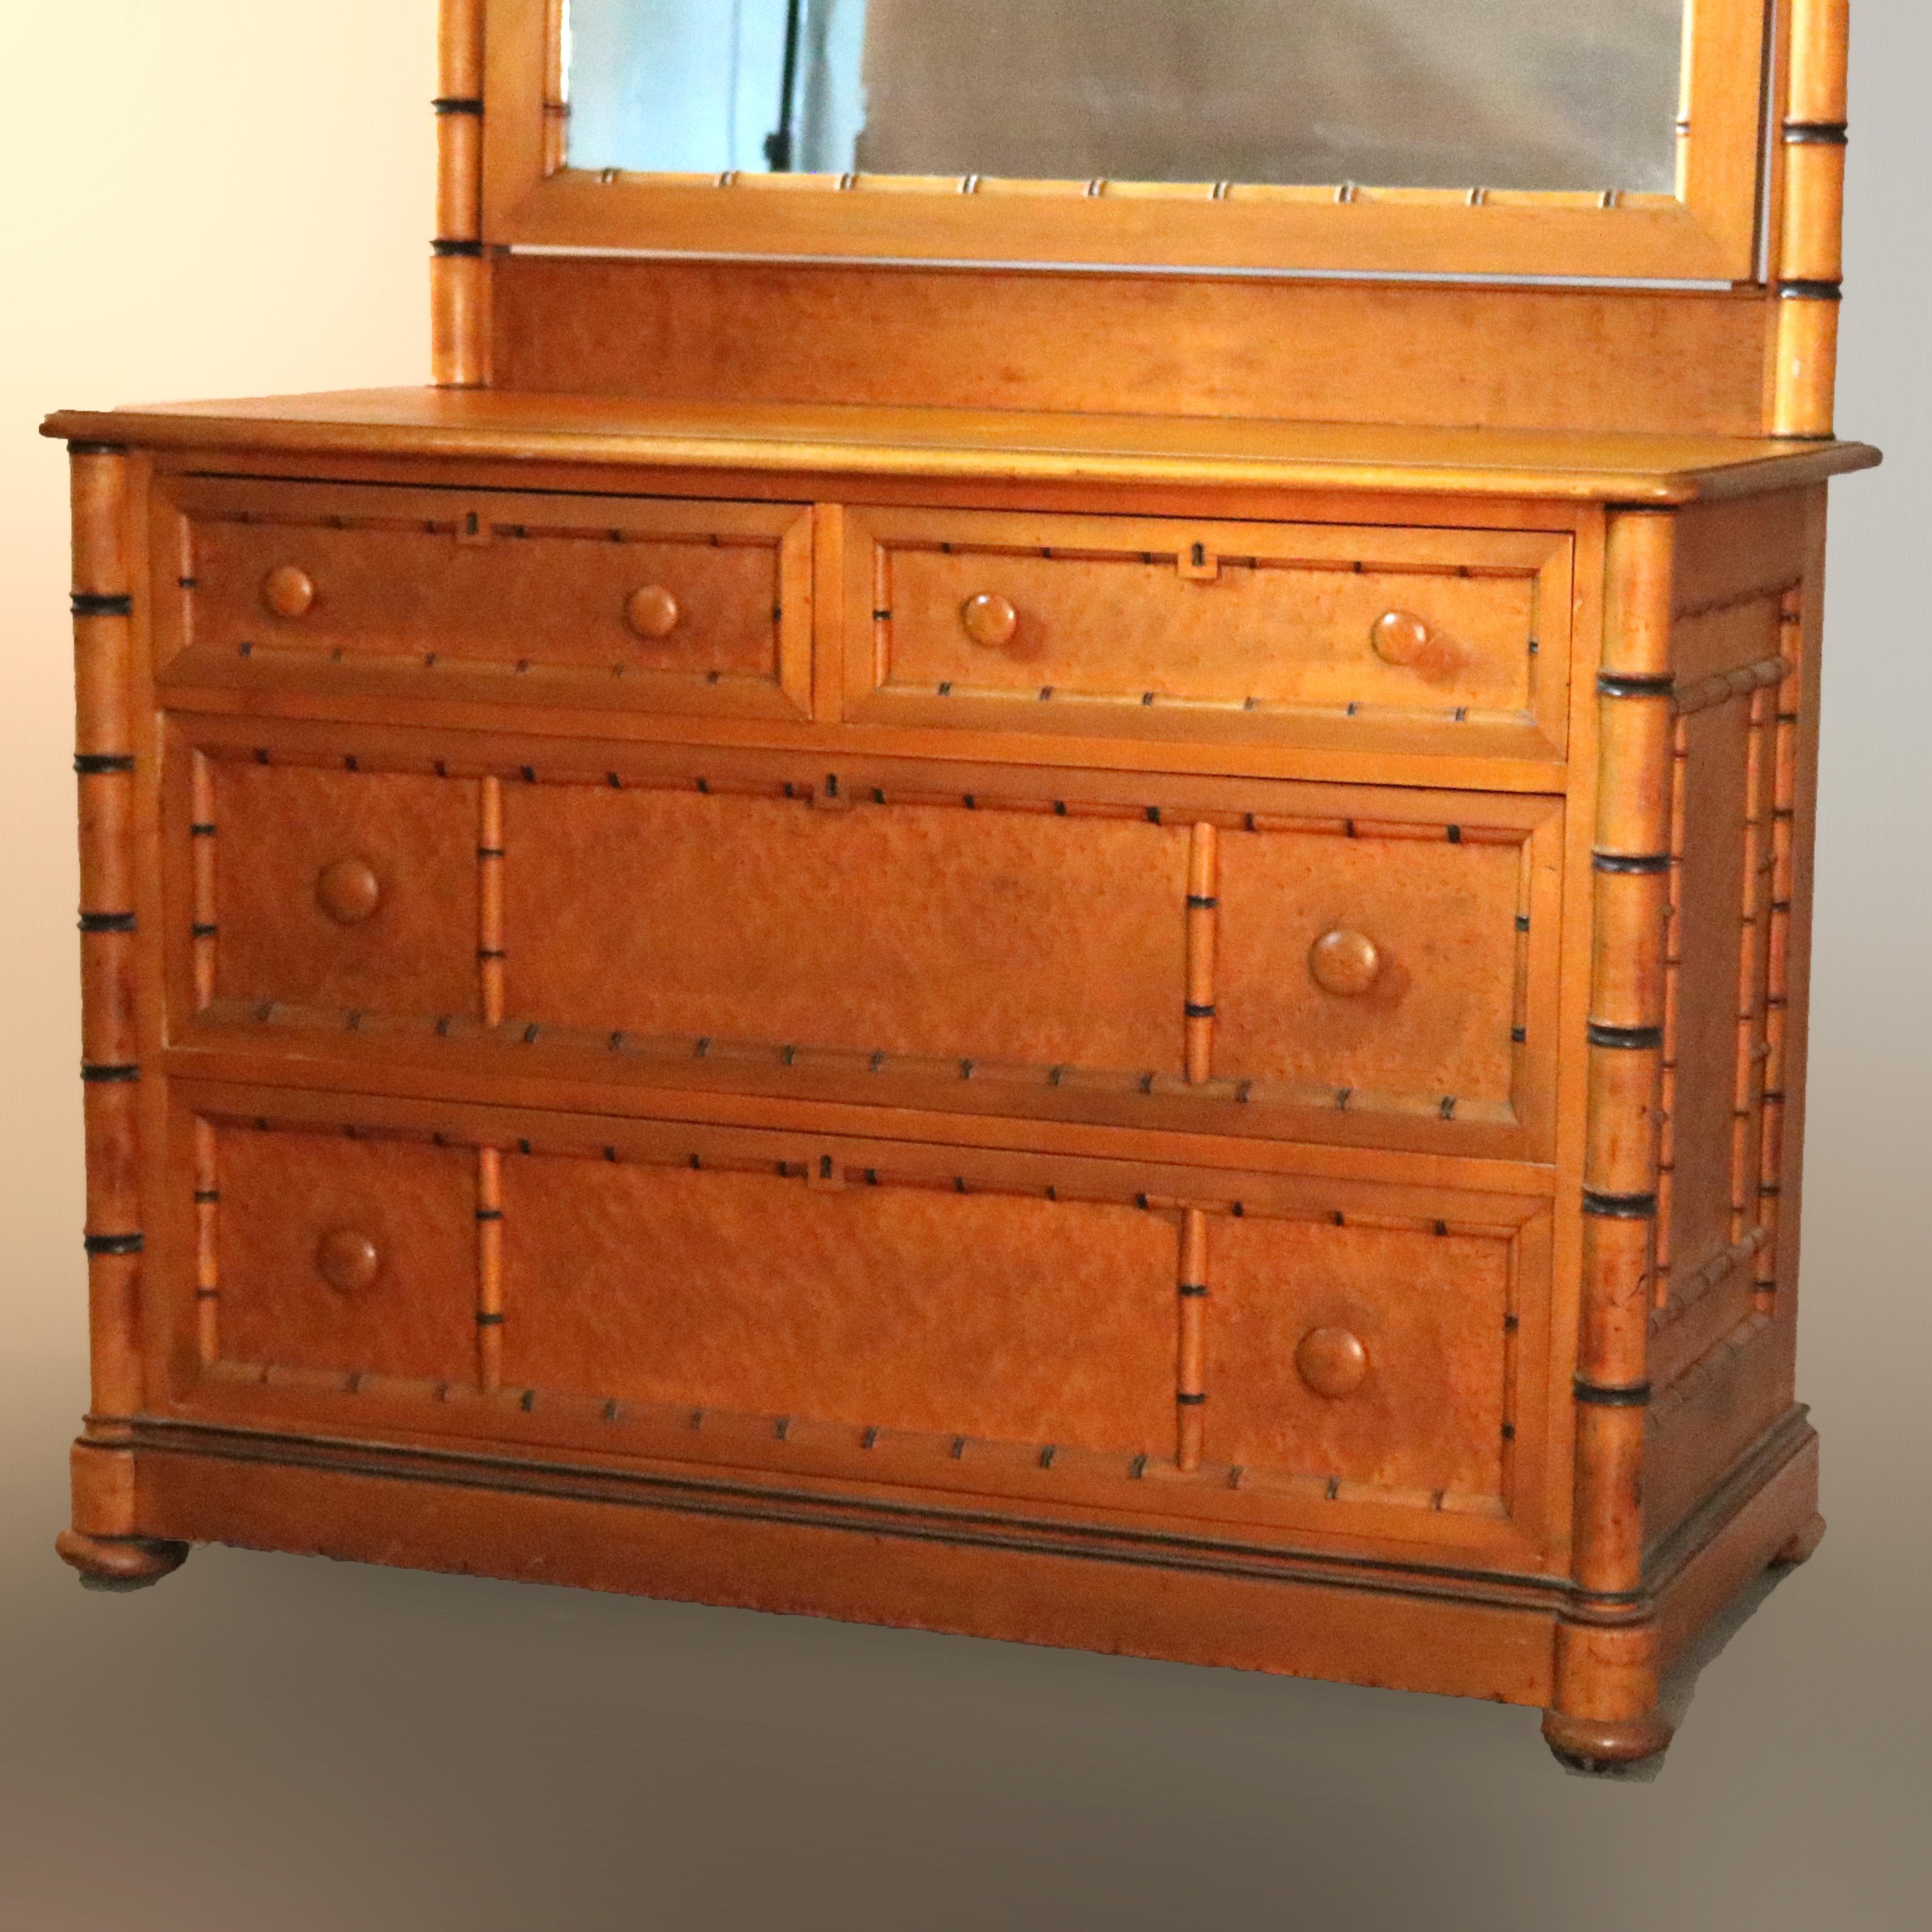 An antique Aesthetic Movement dresser in the manner of R.J. Horner offers cherry and bird’s-eye maple construction with mirror having carved faux bamboo supports surmounting chest of drawers having two small drawers over two long drawers, carved